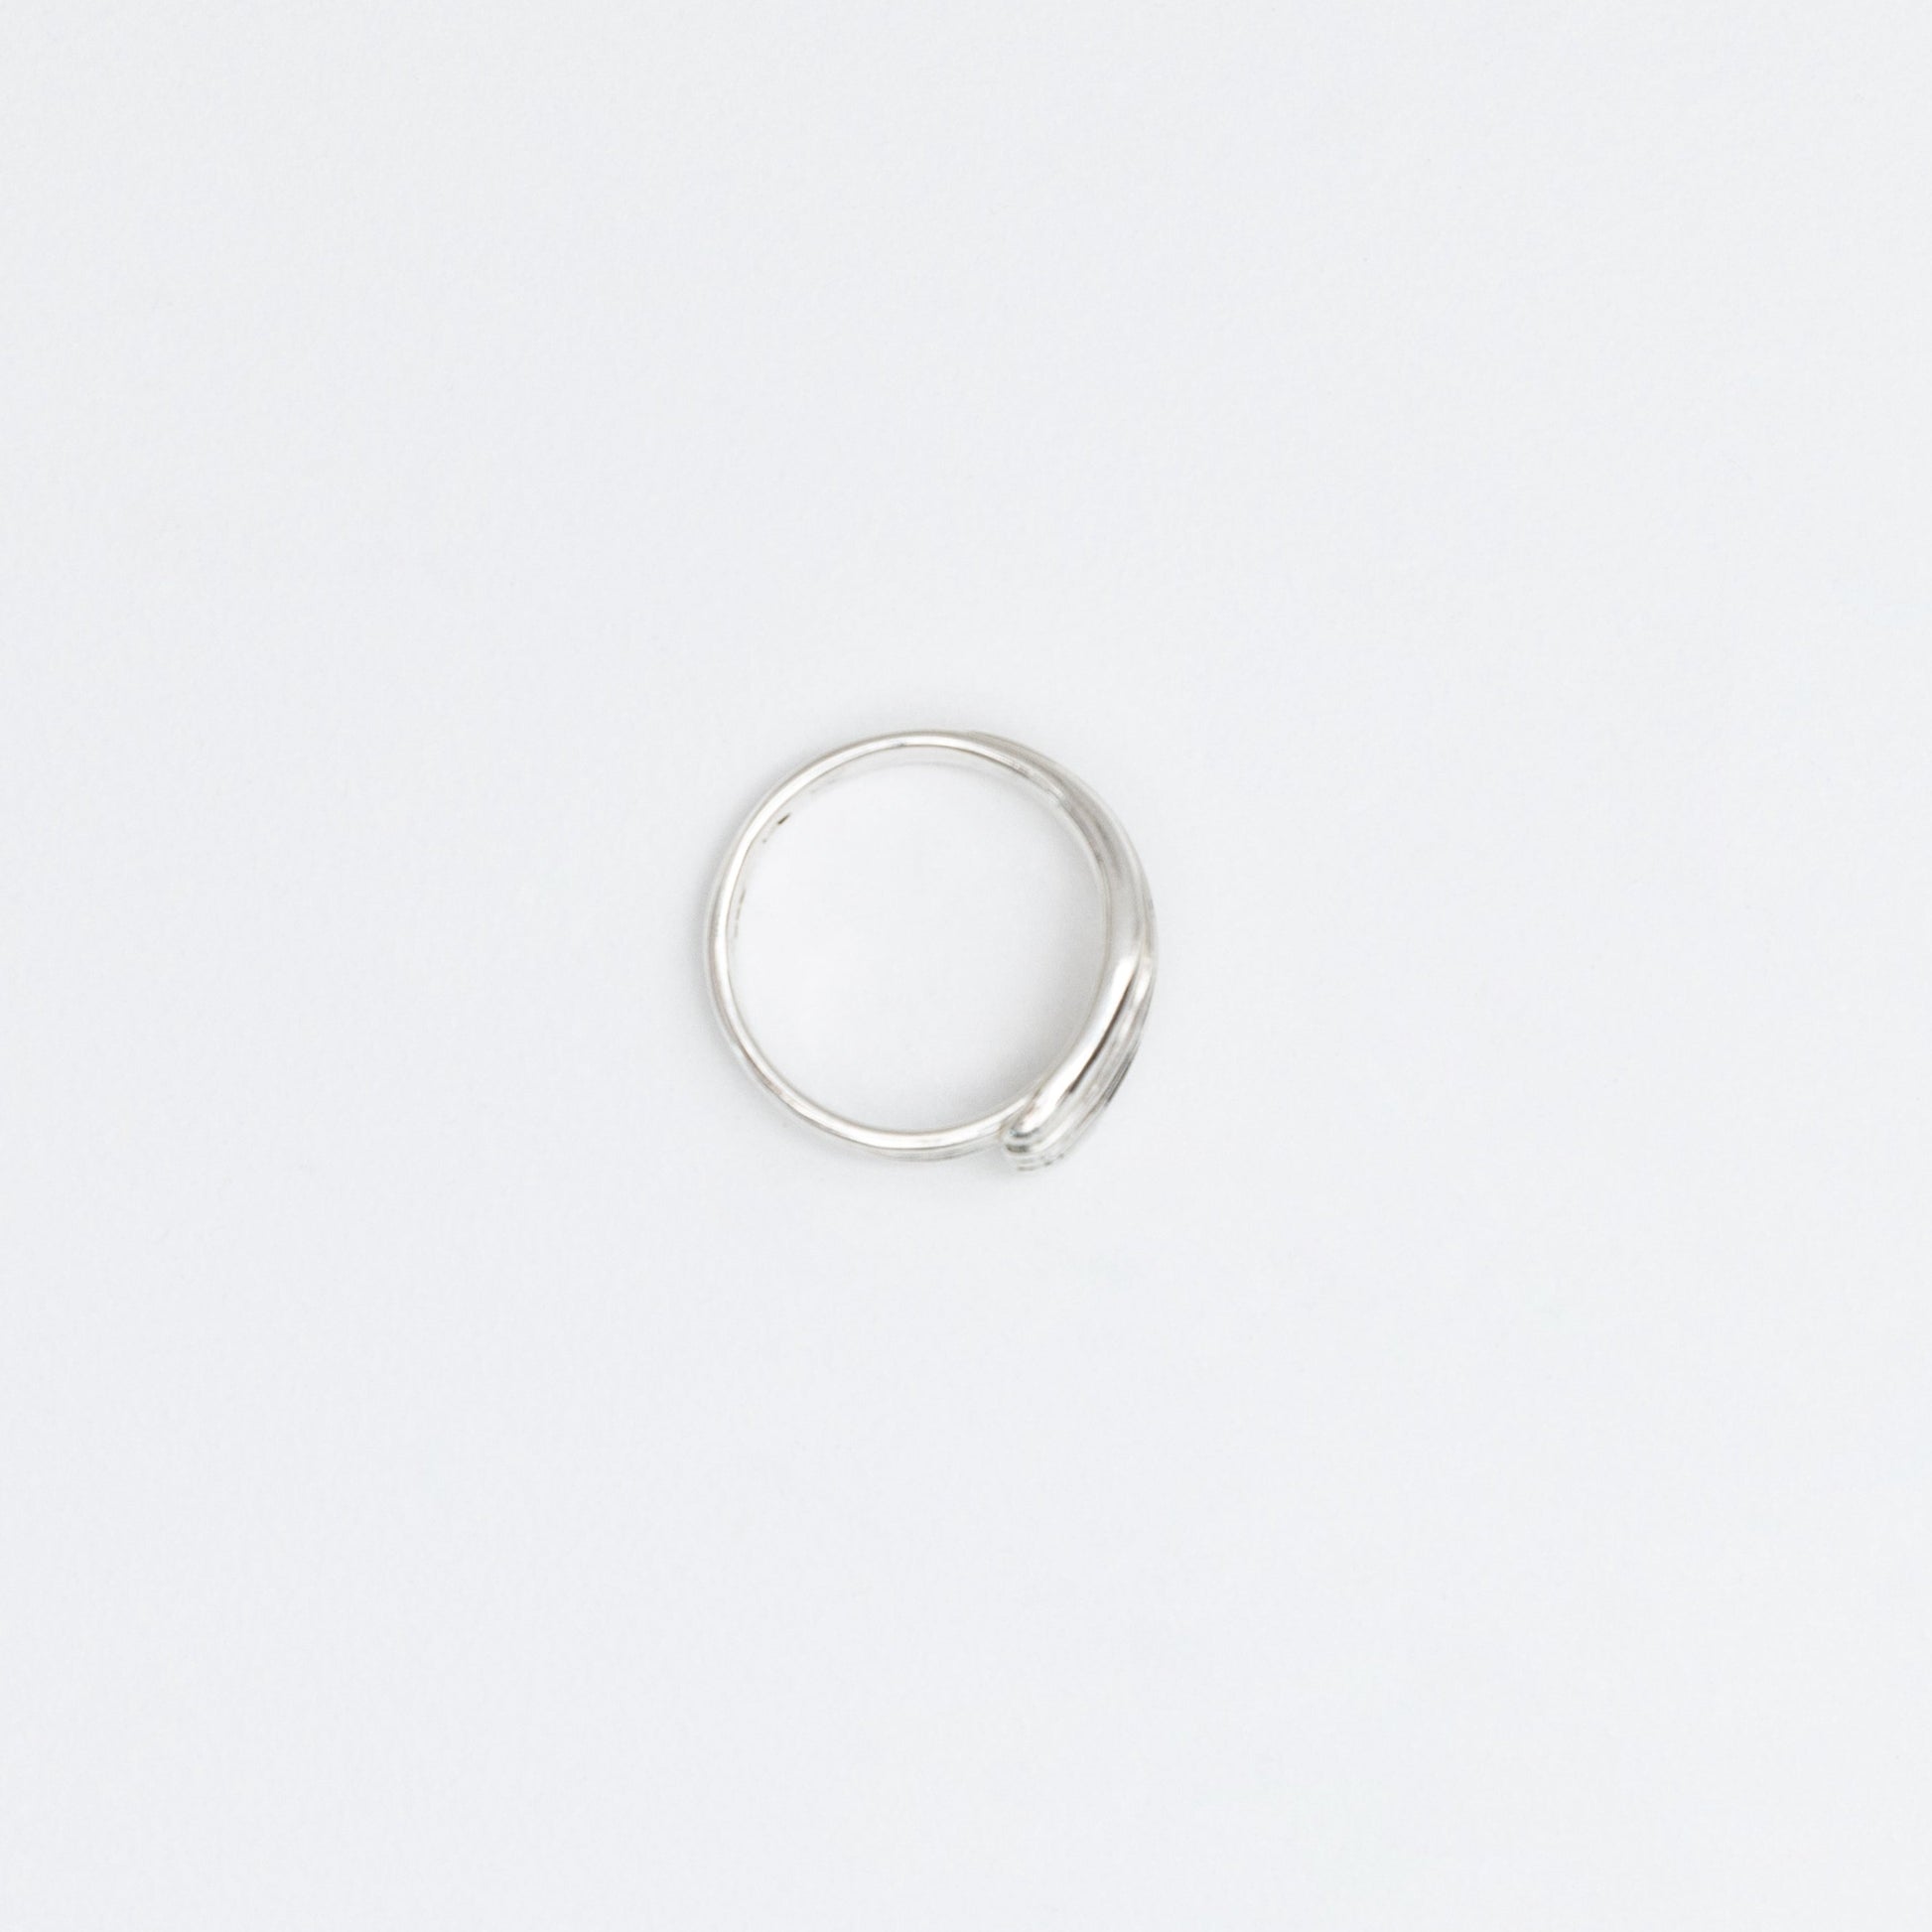 Adjustable silver ring, from above